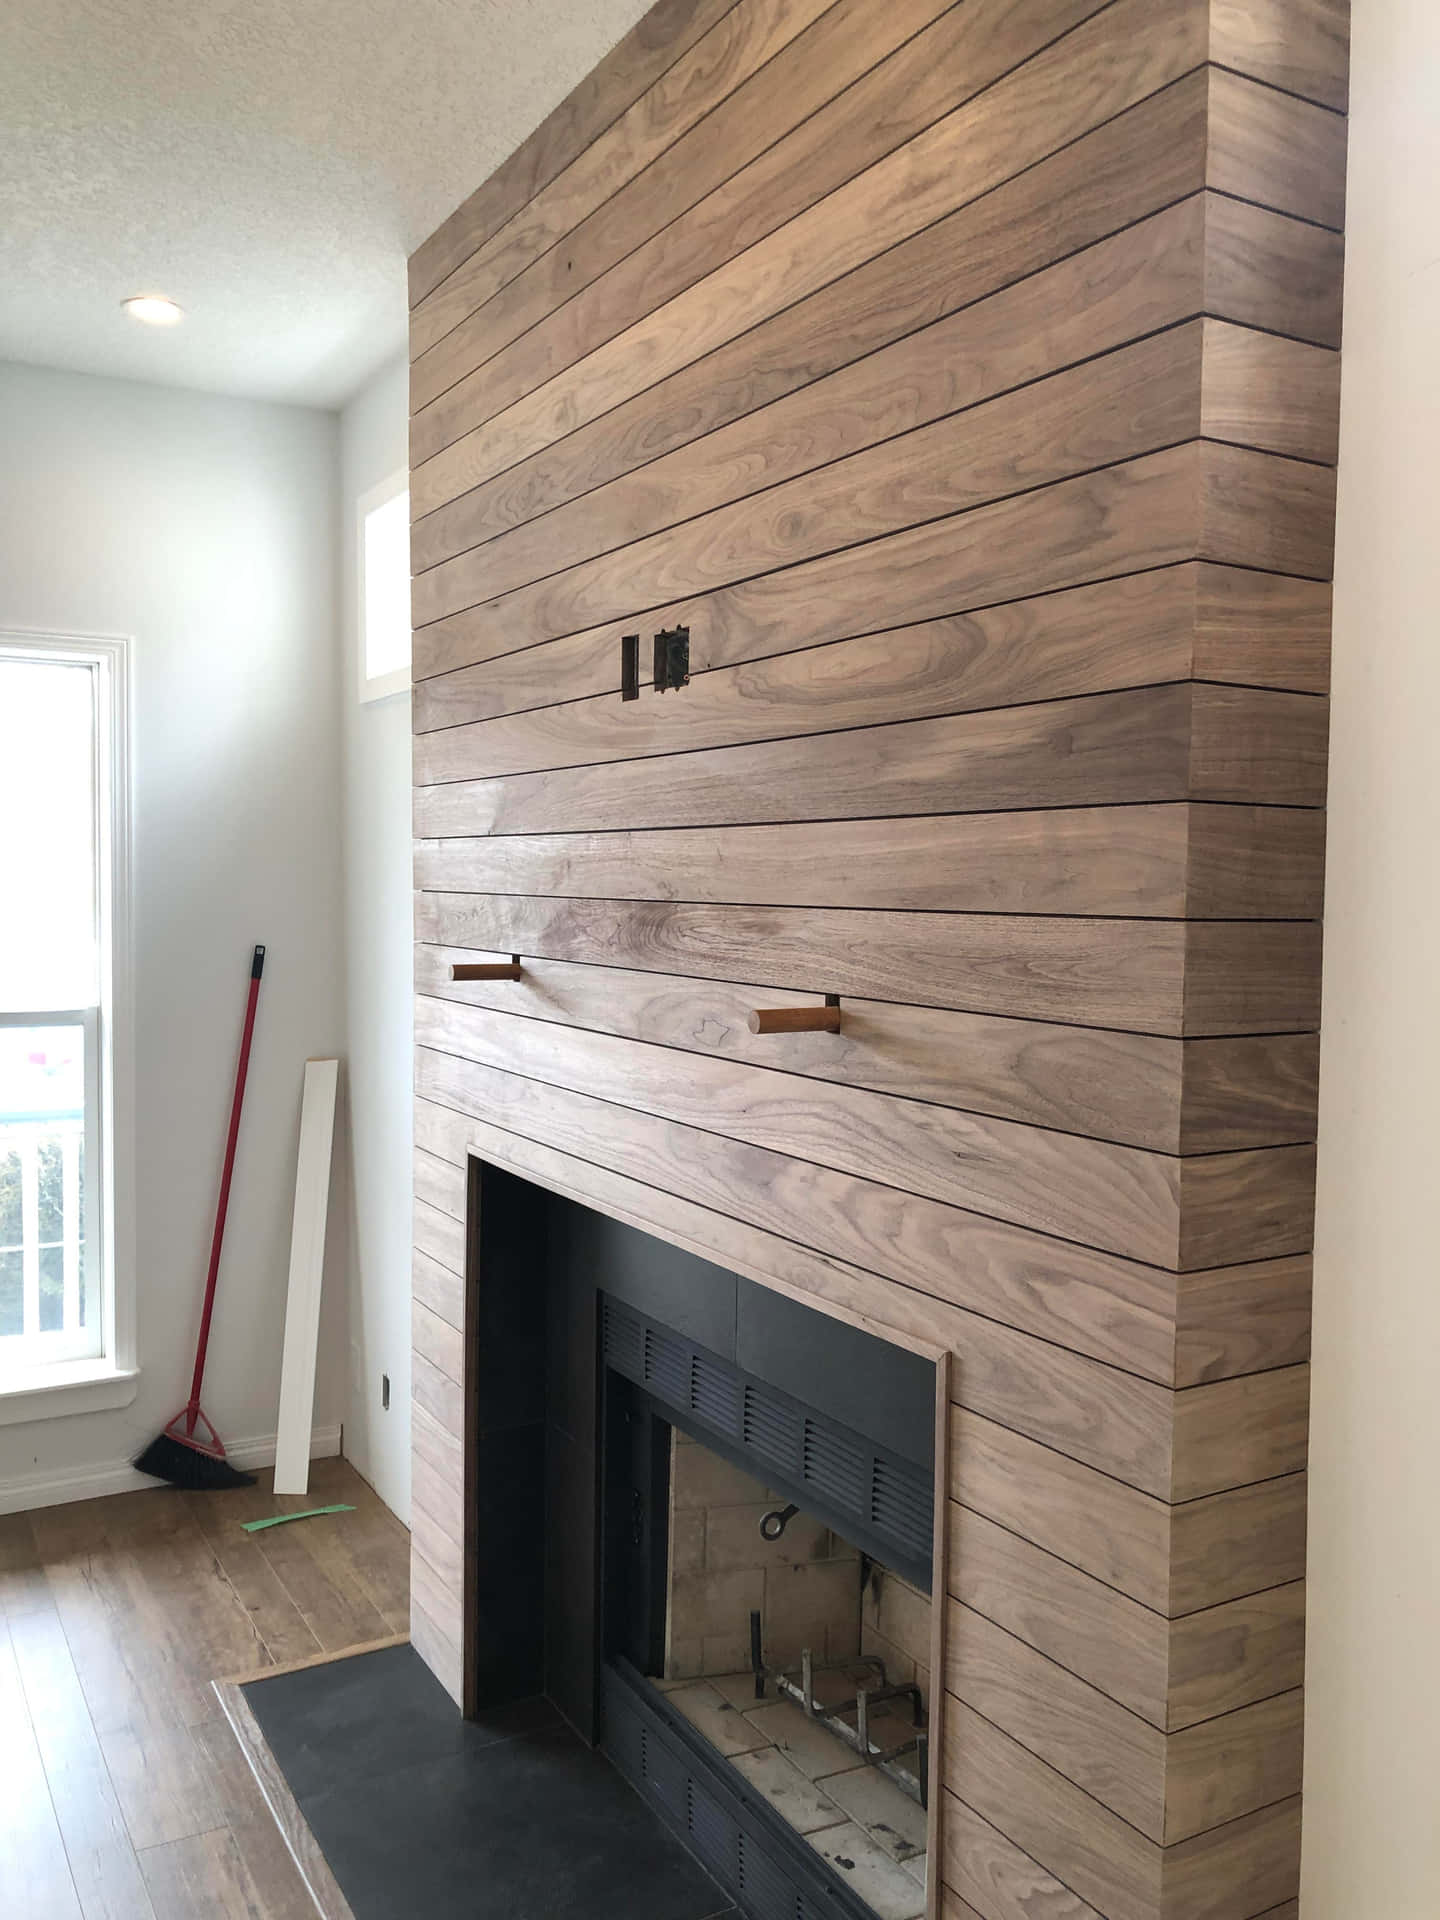 Experience the Cozy Comfort of Shiplap Walls